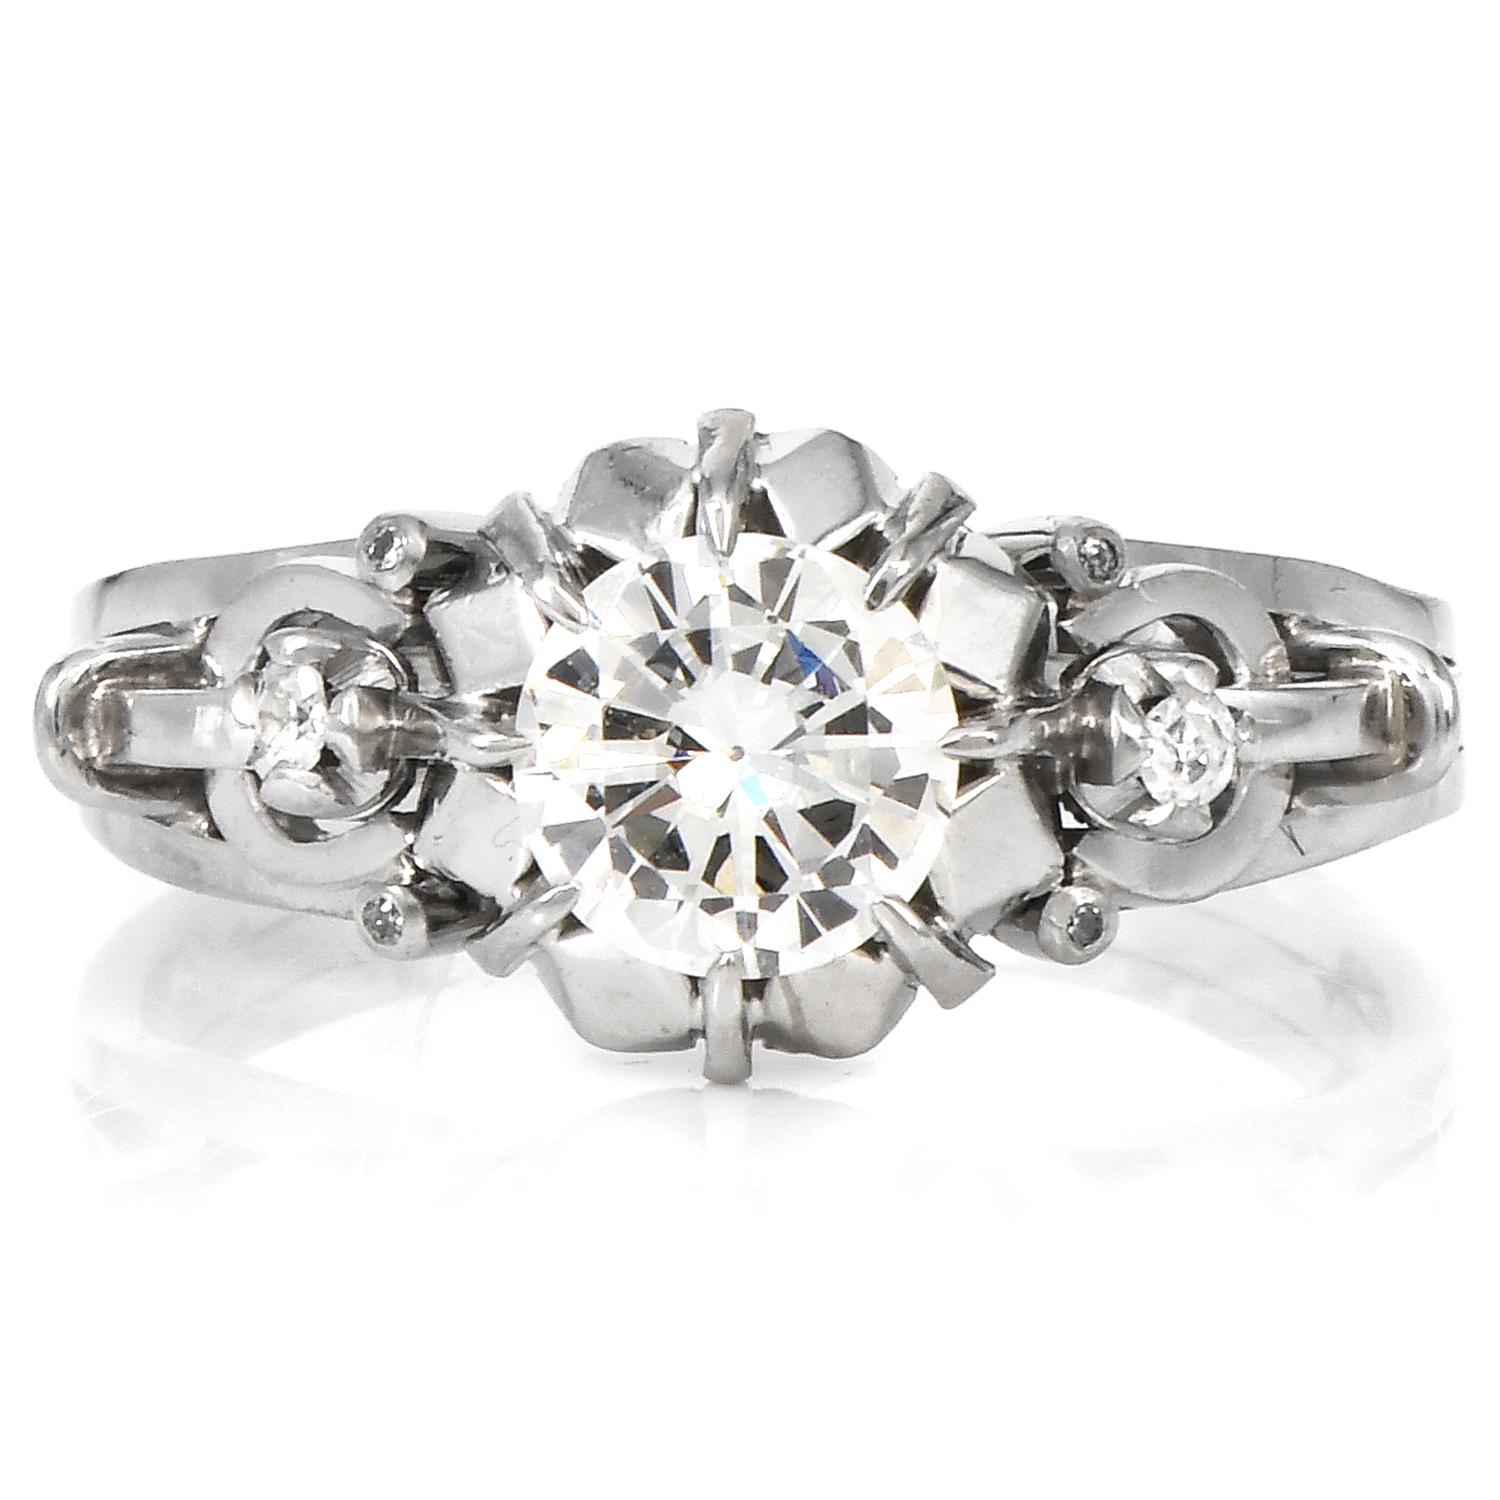 Vintage Retro Diamond Filigree Platinum Engagement Ring.

This ornately carved open work 1950s Diamond Engagement Ring was inspired with 

A floral motif crafted in Platinum.

Adorning the center is a Round Cut Diamond weighing. Approx. 1.02 carat